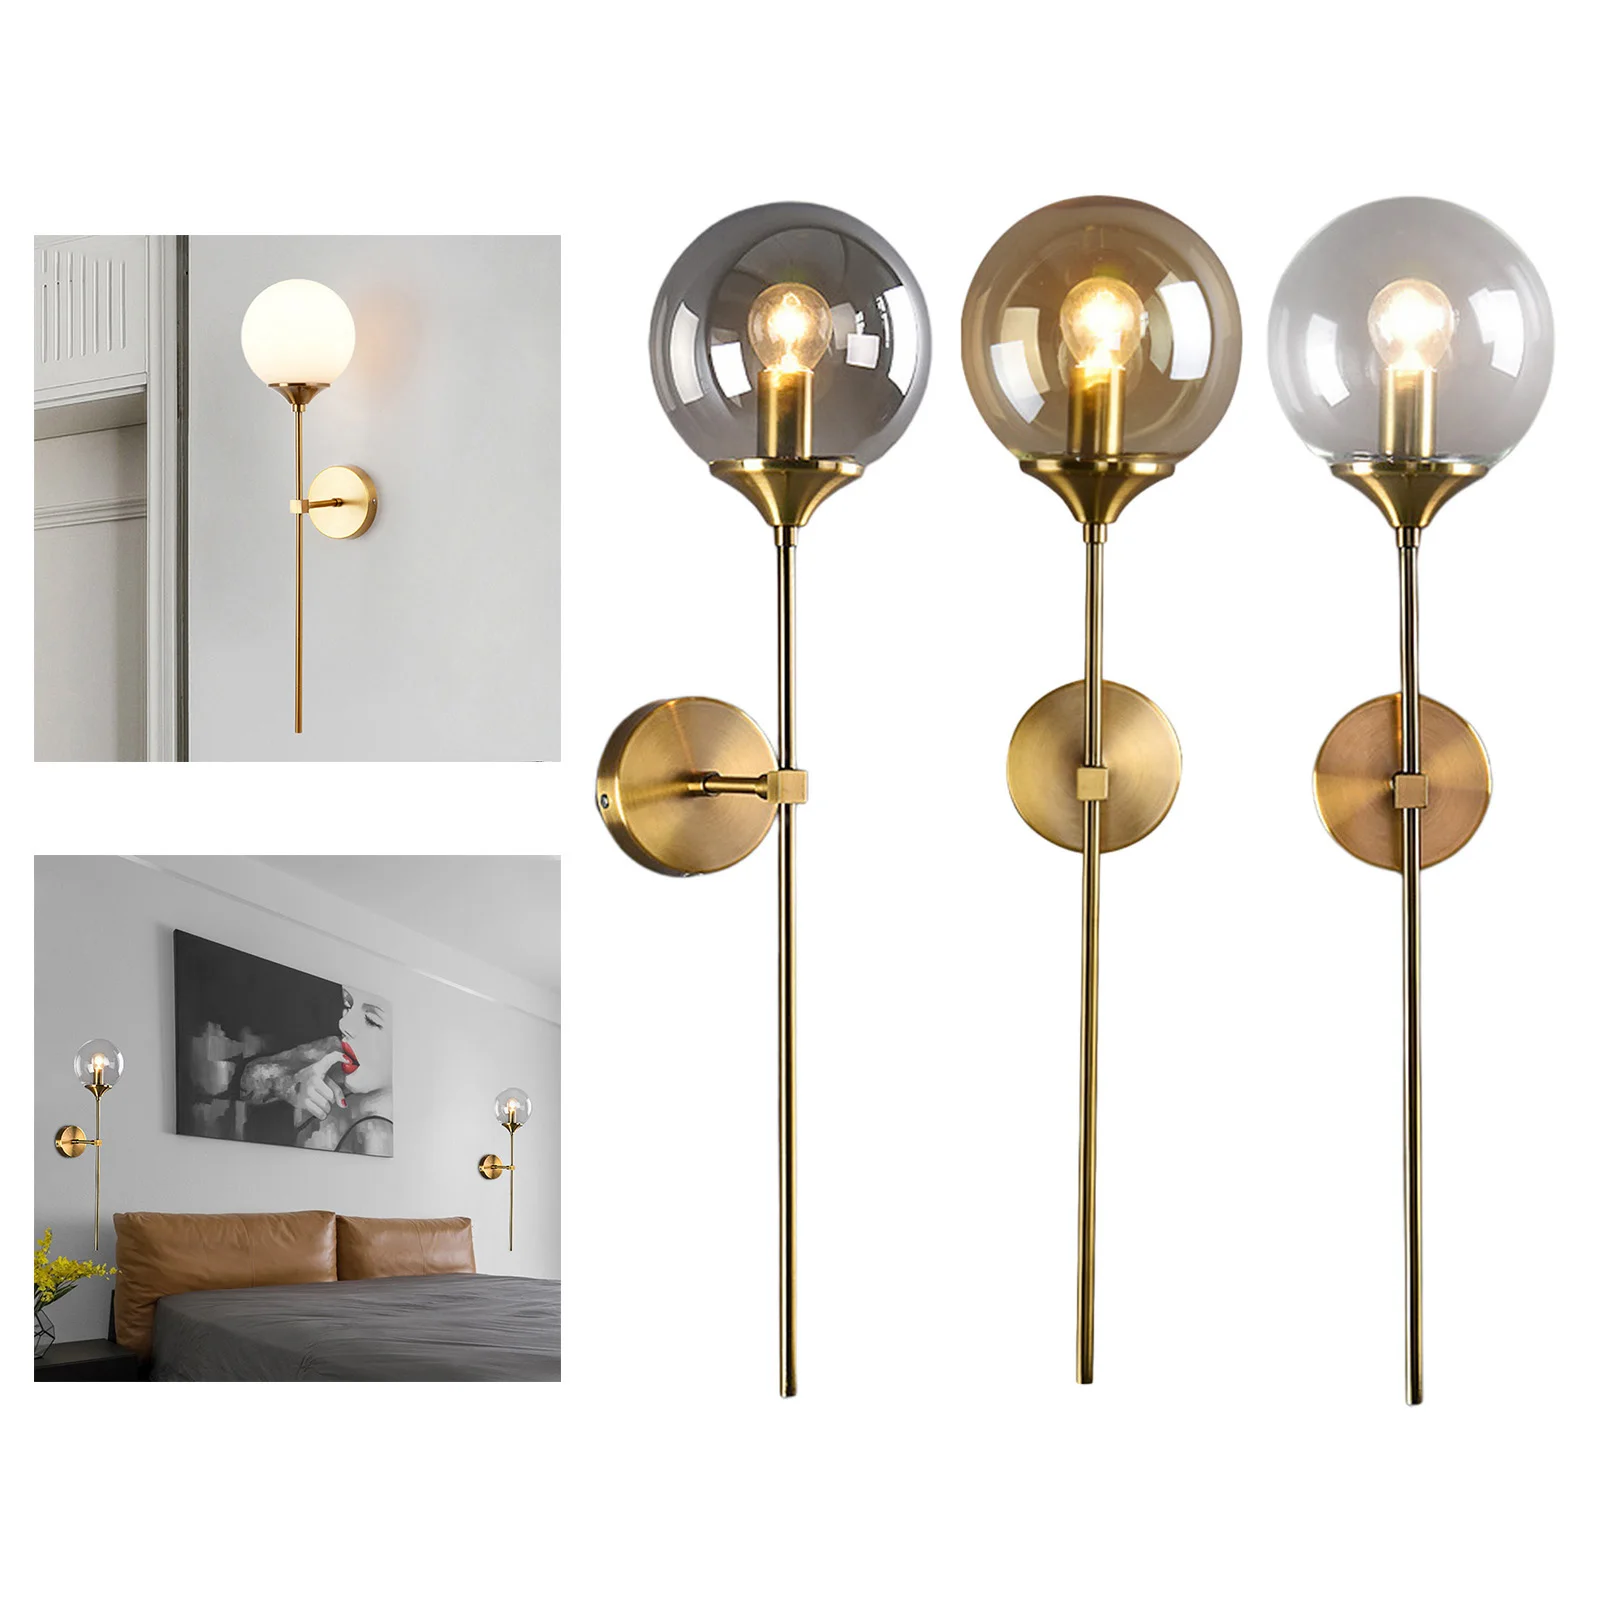 Gold Wall Sconce Lighting Wall Sconce for Living Room Hallway Wall Light 